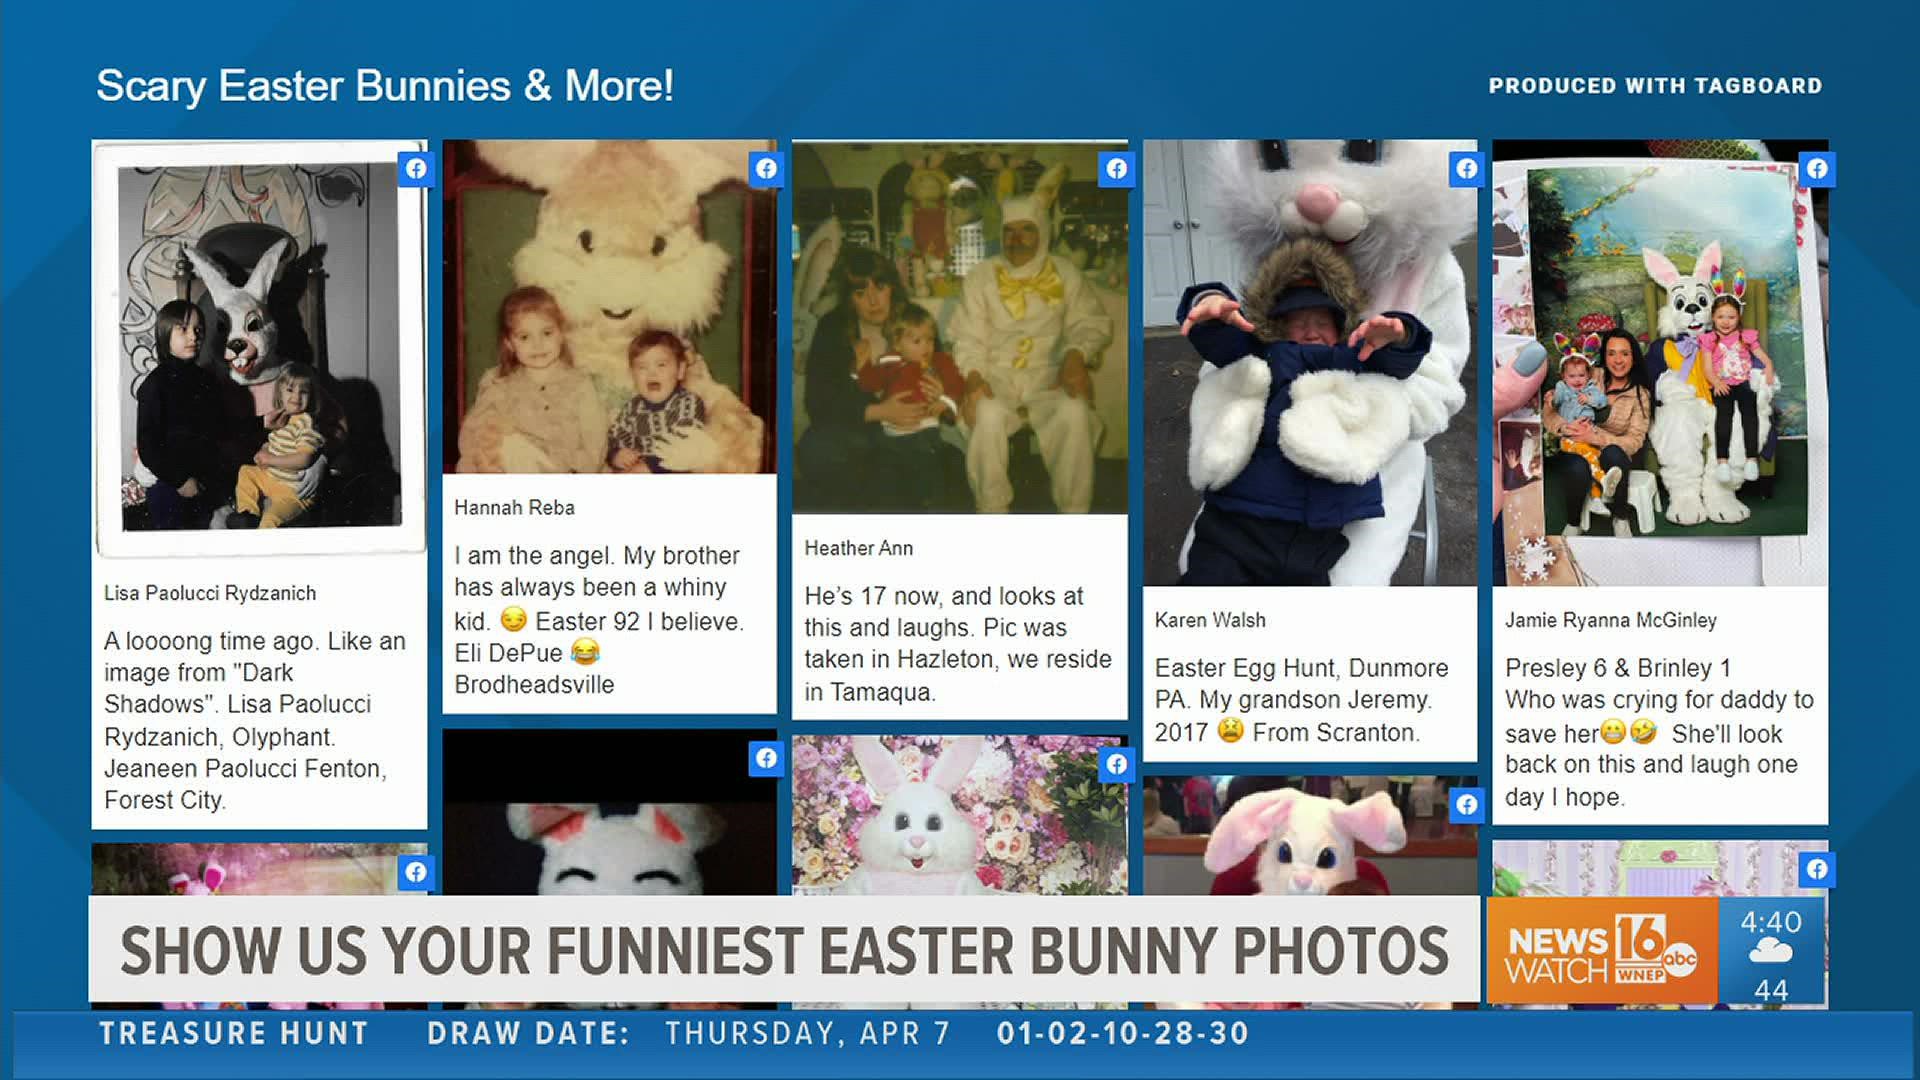 For this Flashback Friday, Newswatch 16's Ryan Leckey shares your most frightening Easter photos.